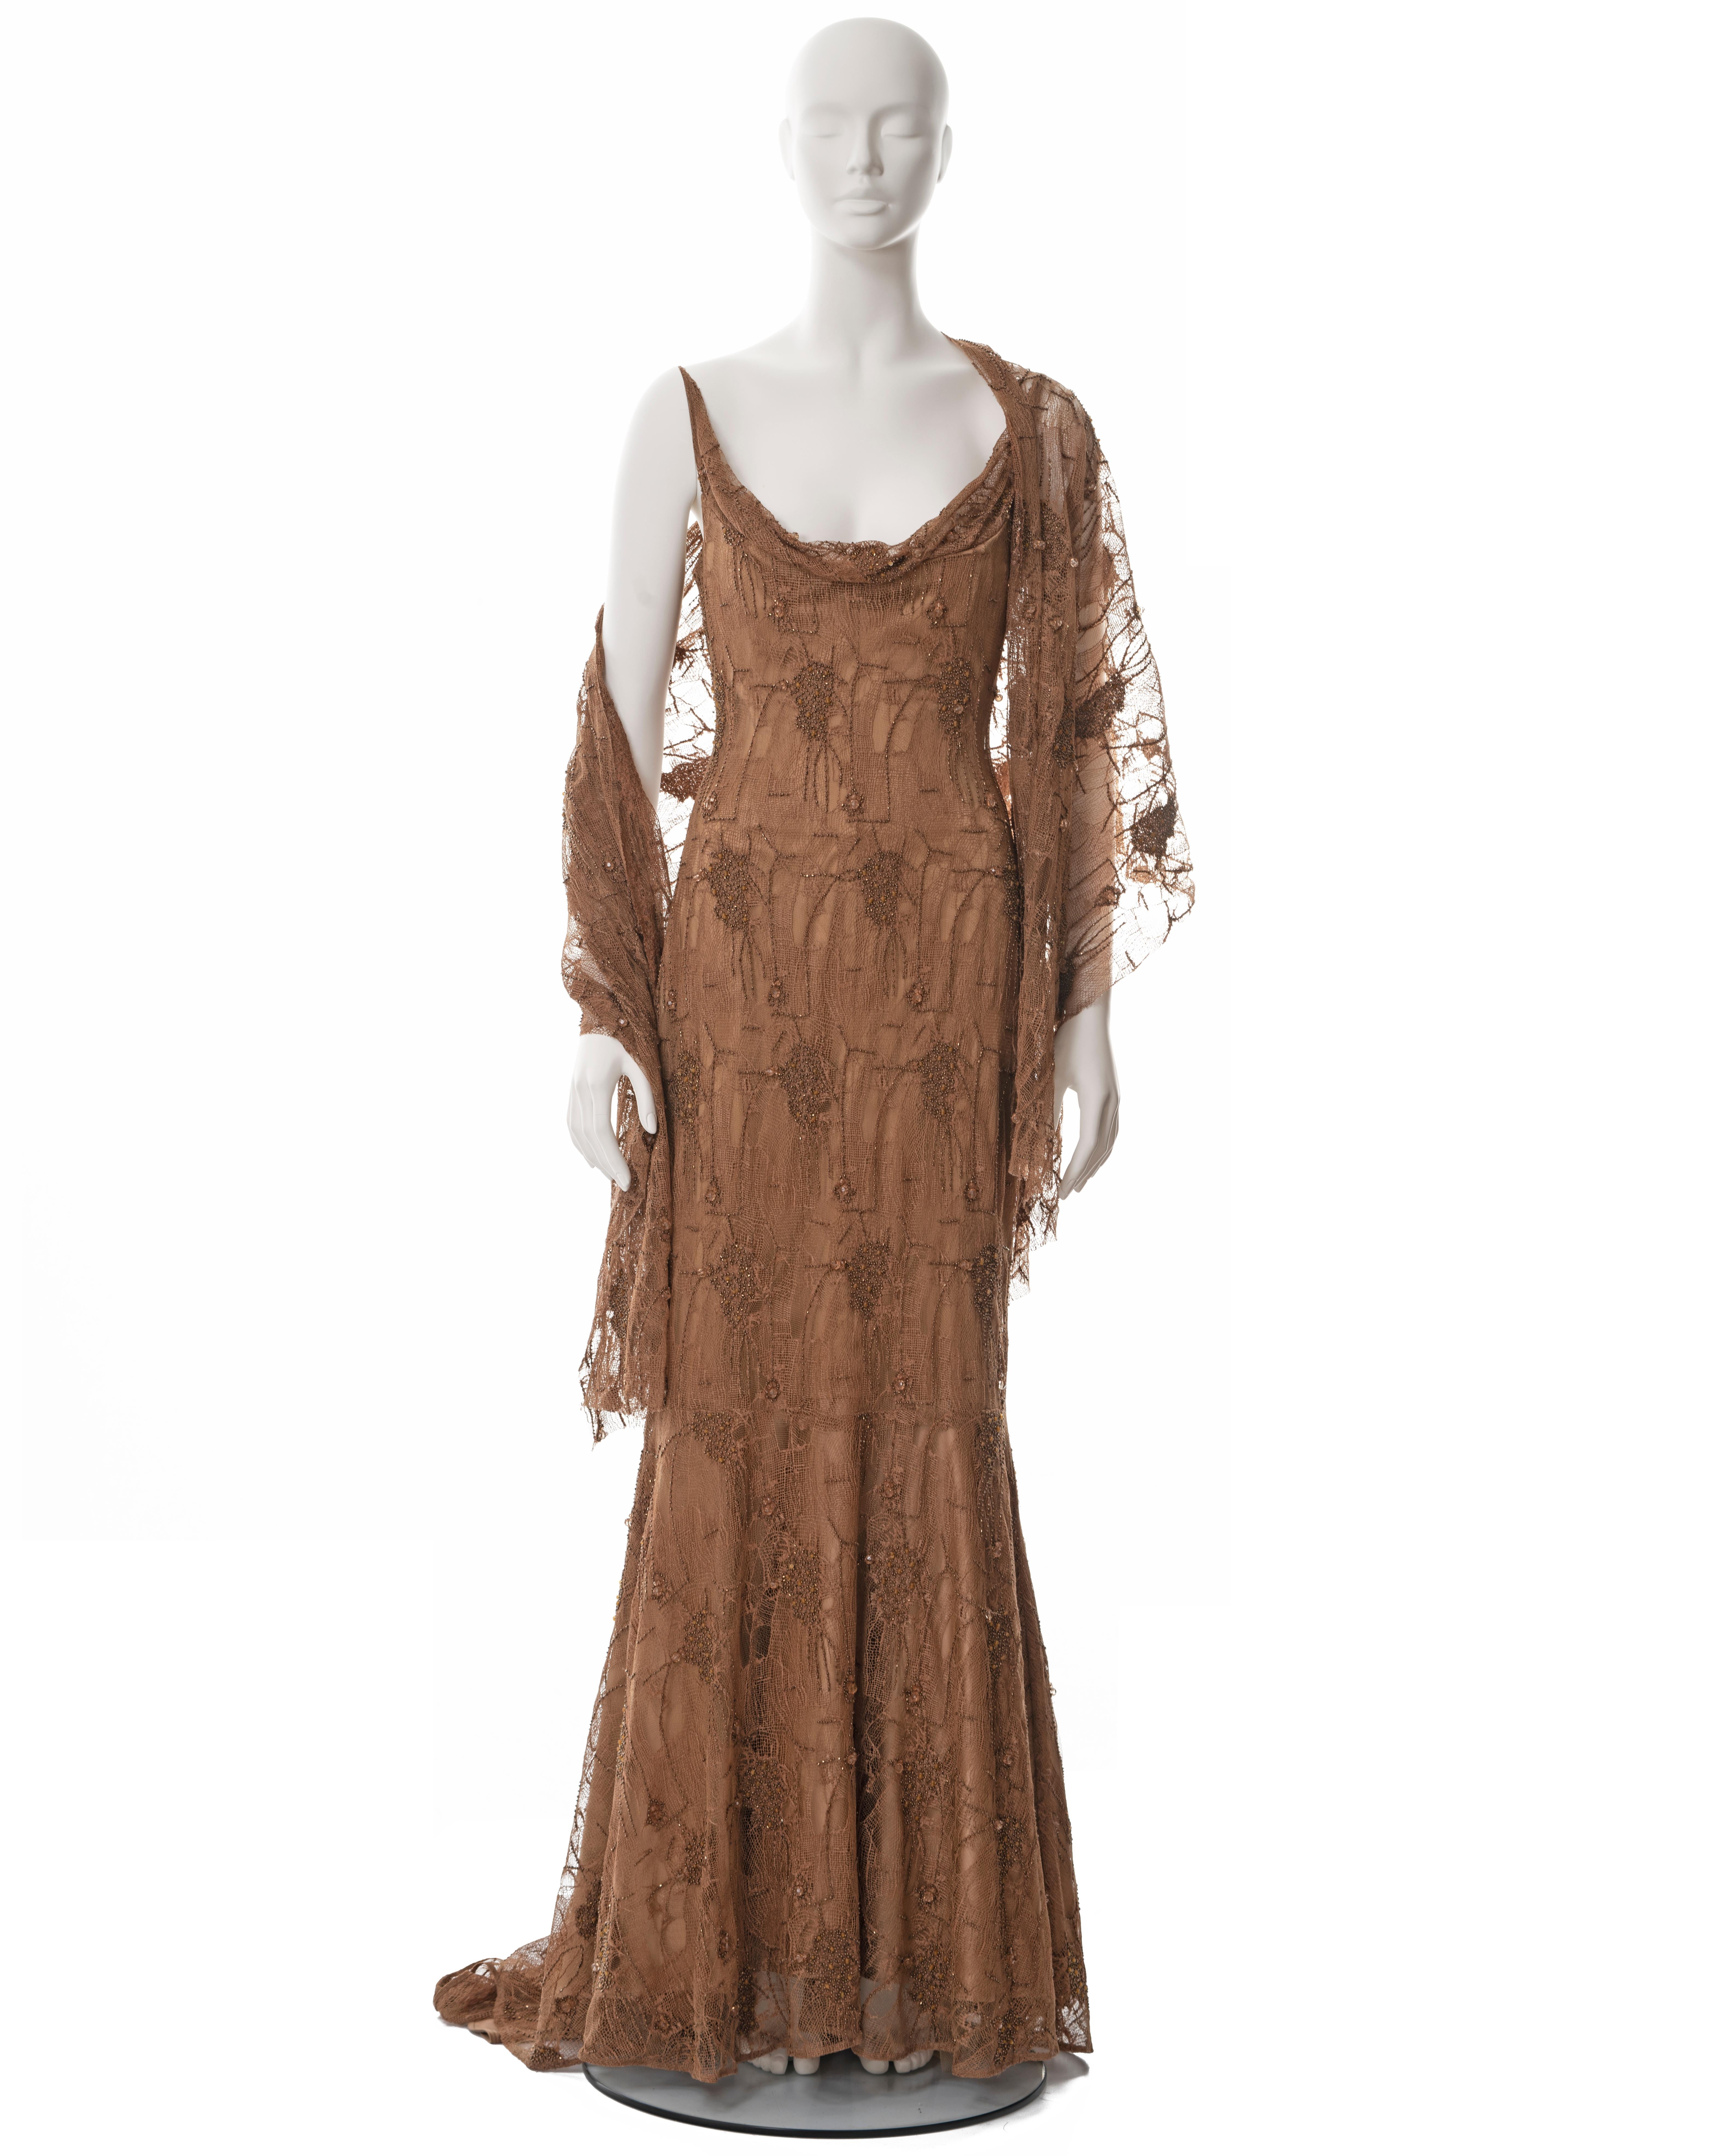 ▪ Guy Laroche copper beaded lace evening dress
▪ Designed by Laetitia Hecht
▪ Sold by One of a Kind Archive
▪ Fall-Winter 2002
▪ Cowl neck 
▪ Built-in corset 
▪ Floor-length skirt with train 
▪ Matching beaded lace shawl 
▪ FR 44 - UK 14 - US 10
▪